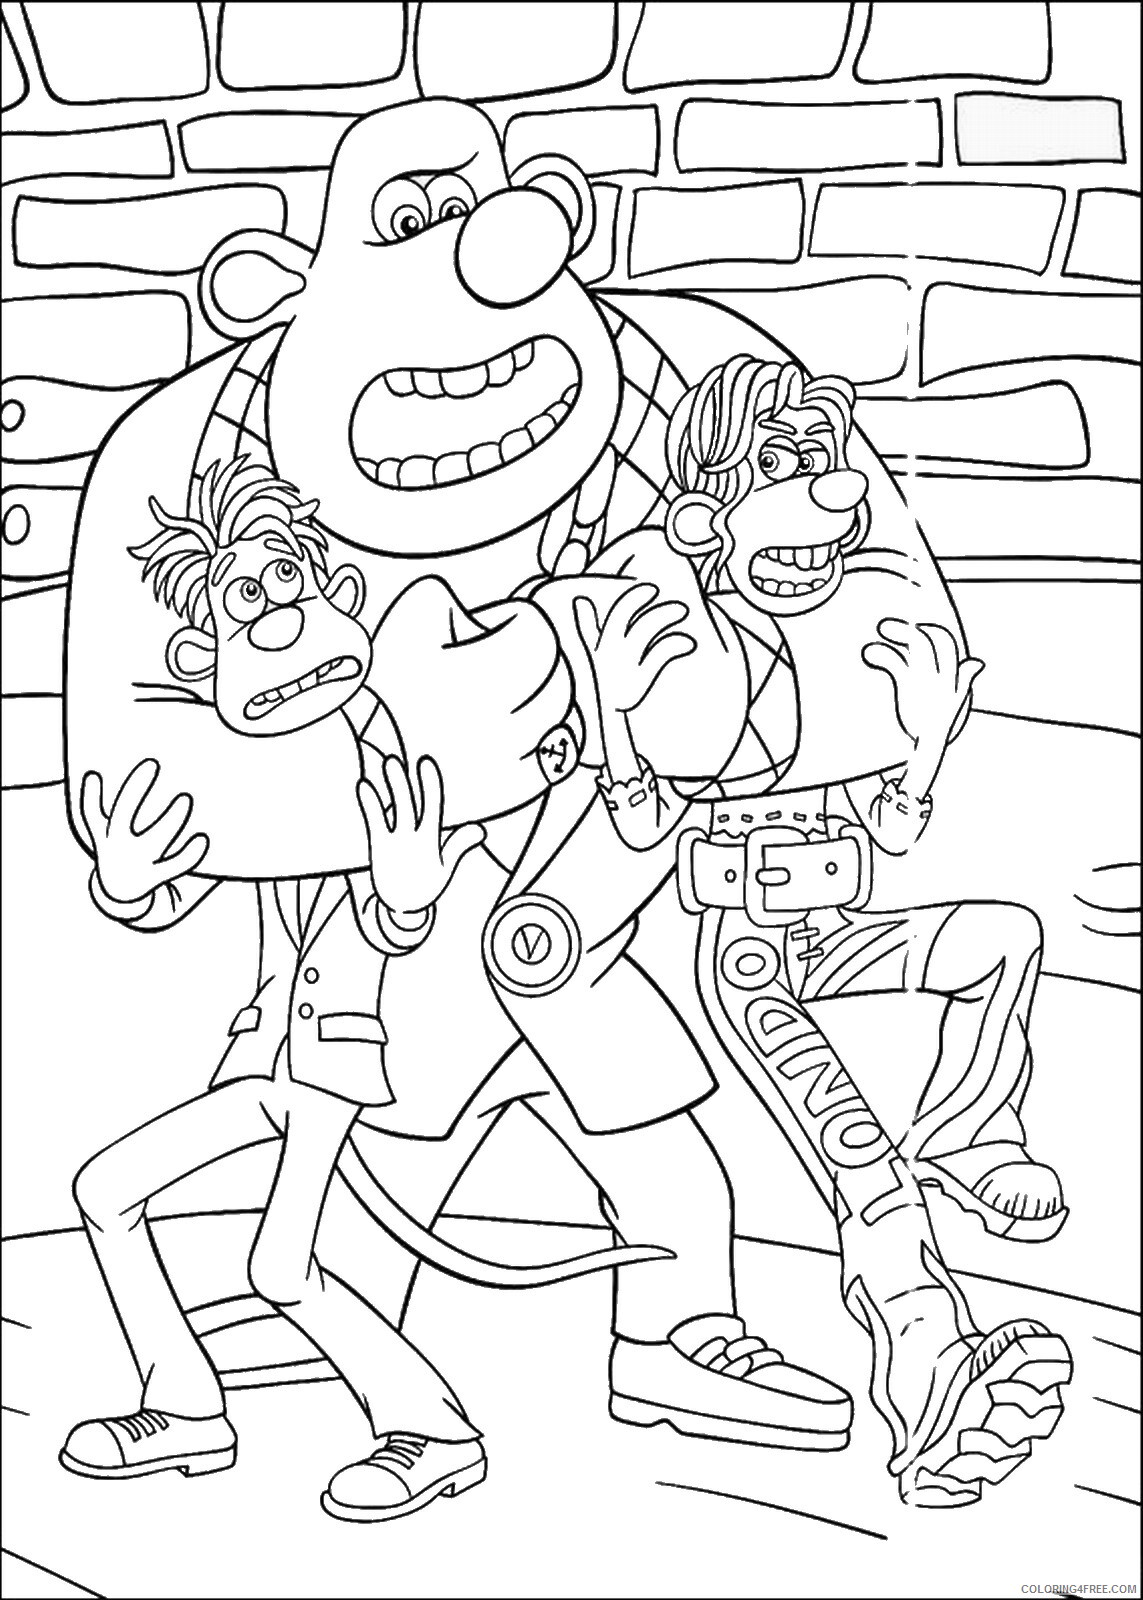 Flushed Away Coloring Pages TV Film flushed_cl_08 Printable 2020 02967 Coloring4free